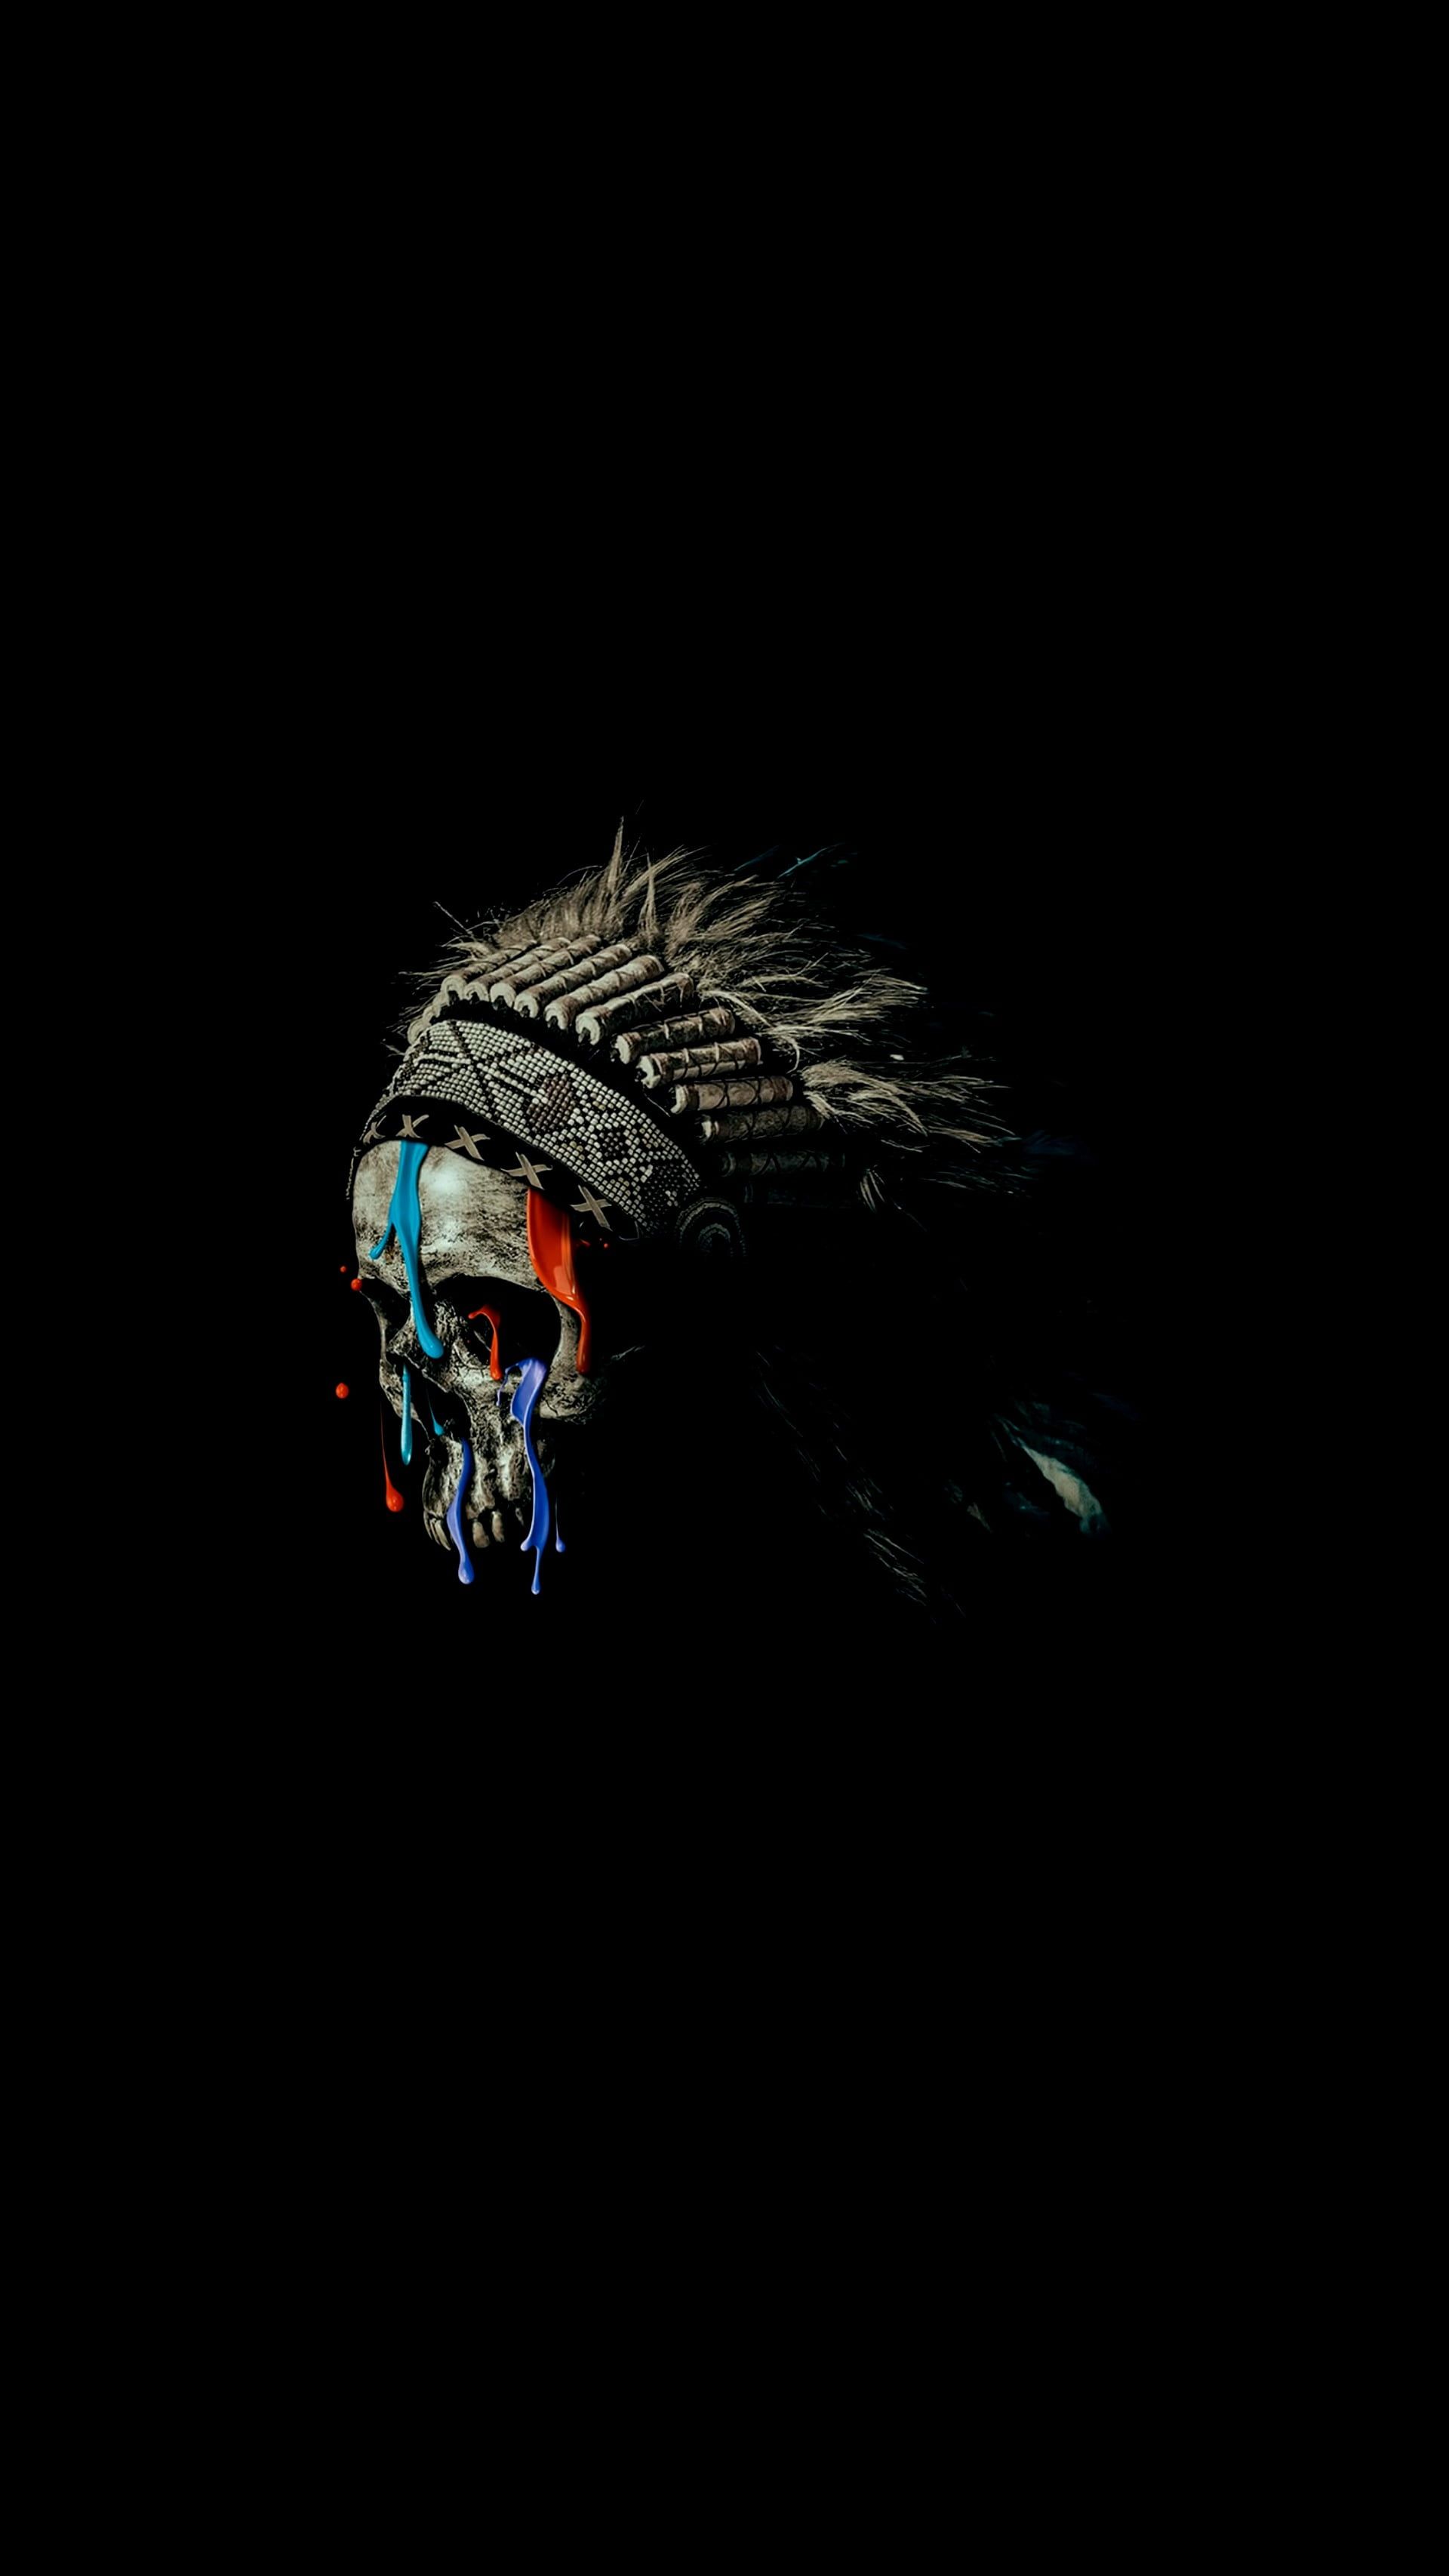 white and multicolored skull with war bonnet illustration black